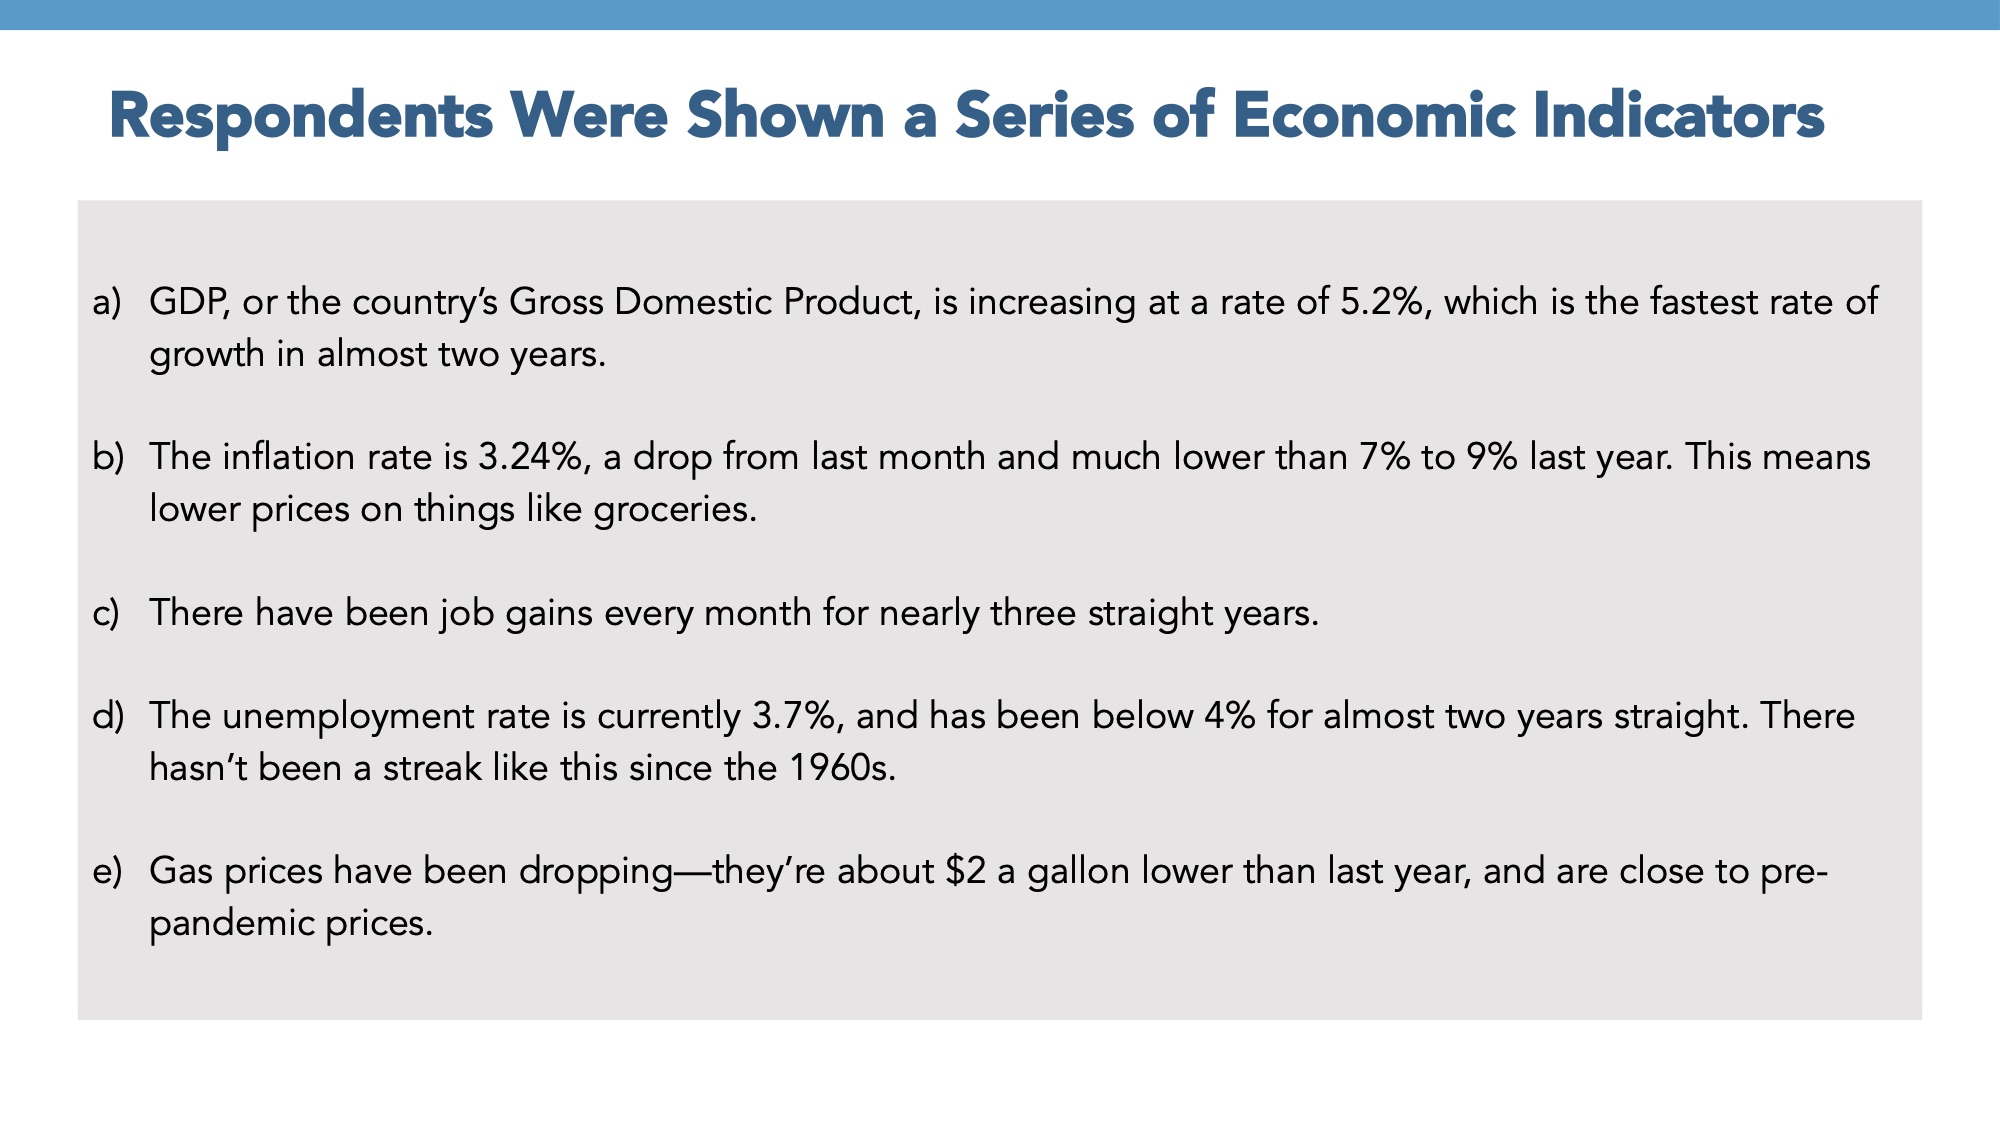 Focus group report slide titled: Respondents Were Shown a Series of Economic Indicators